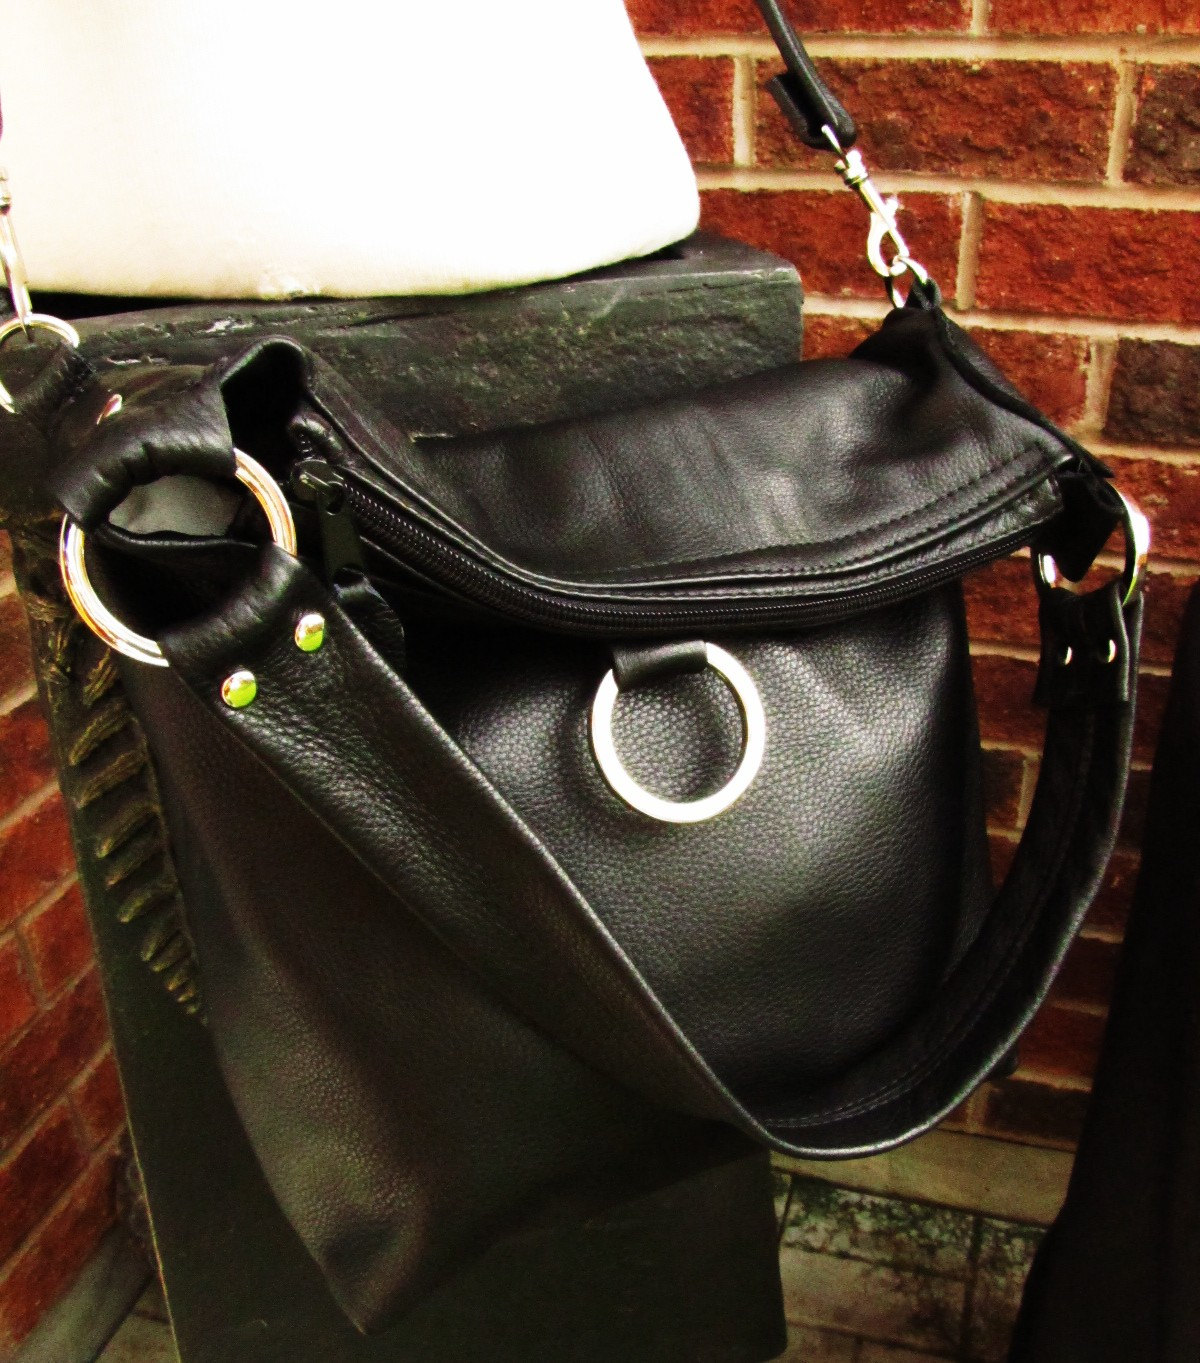 Black leather bag, fold over tote - Large 3 way convertible purse